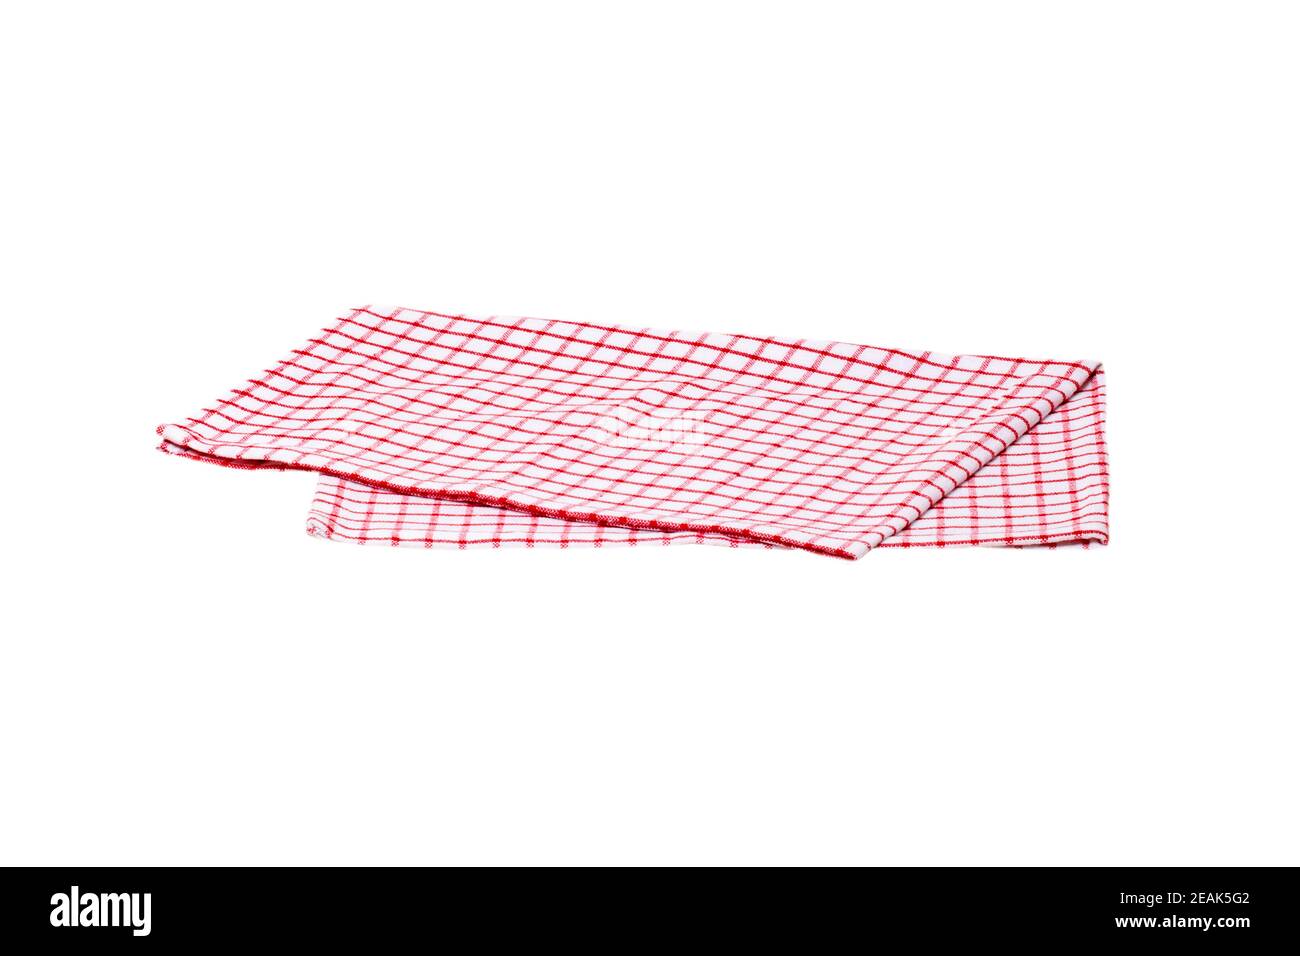 Closeup of a red and white checkered kitchen cloth or napkin isolated on white background. Kitchen accessories. Macro photgraph. Stock Photo